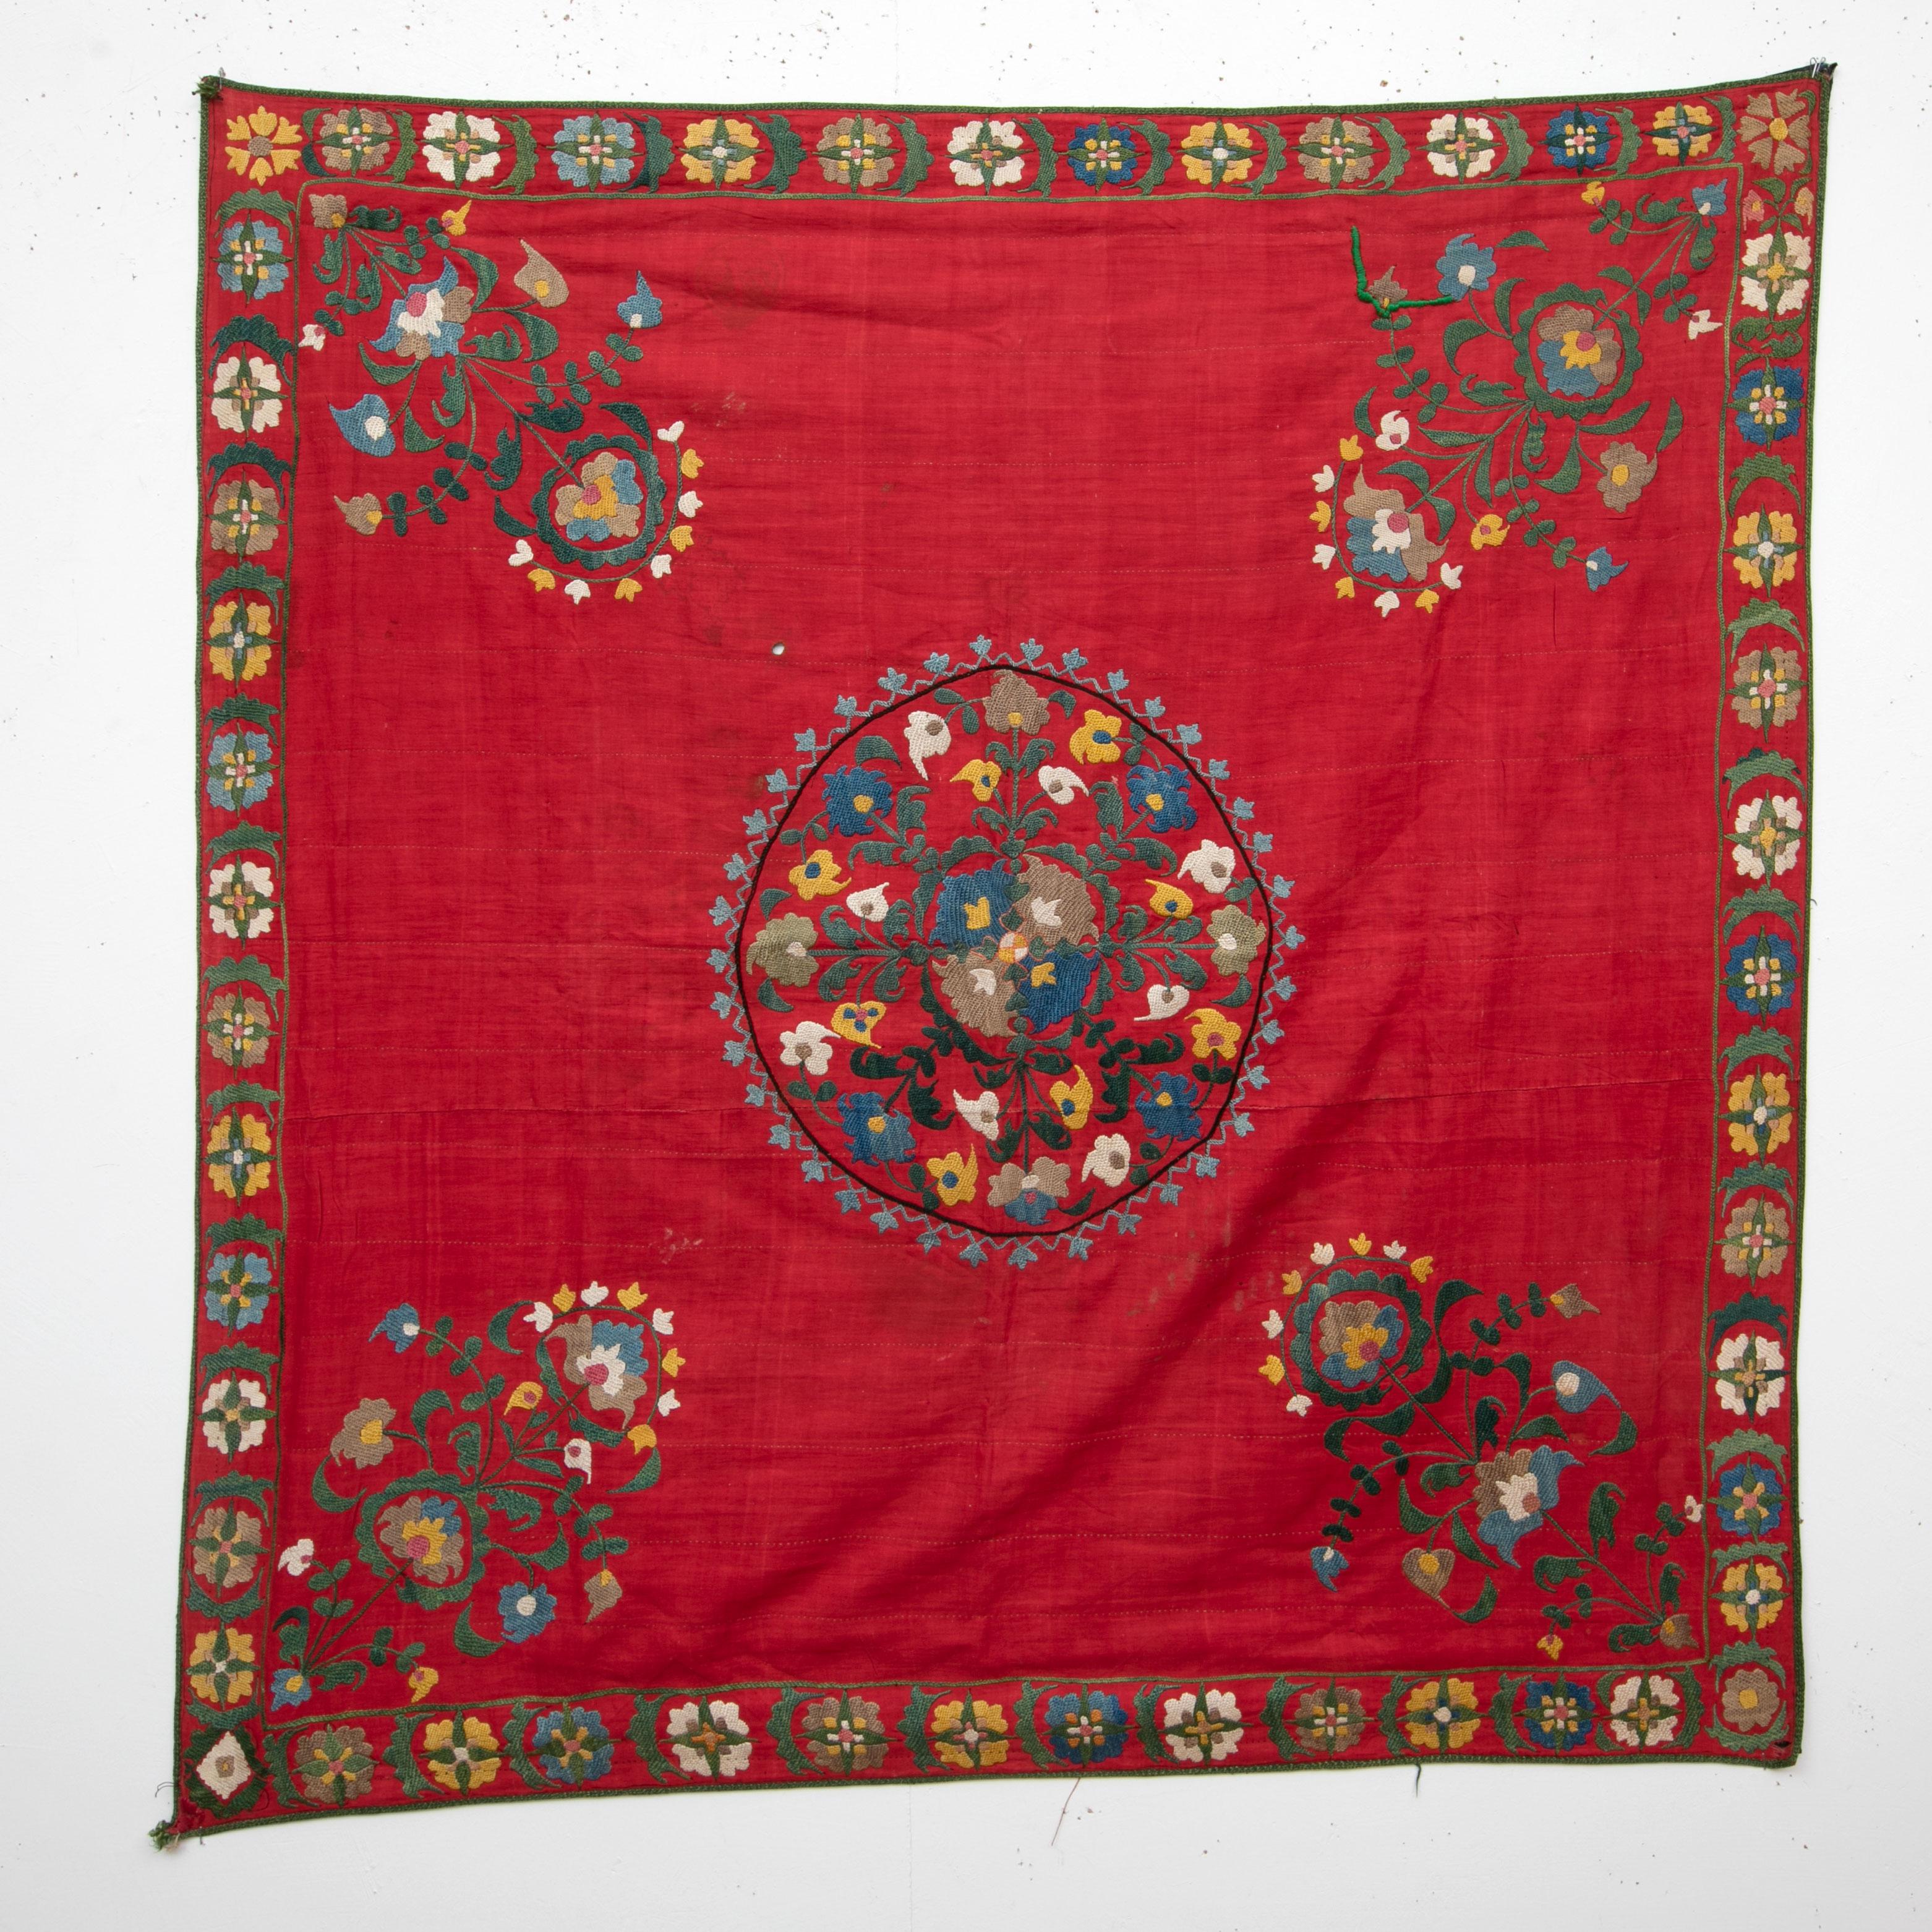 A squarish antique suzani from Tashkent Uzbekistan dating probably back to 1880s. The small square format suzanis are used in special occasion to wrap valuables and gifts. 
The suzani is being offered as found. It still has its original lining of